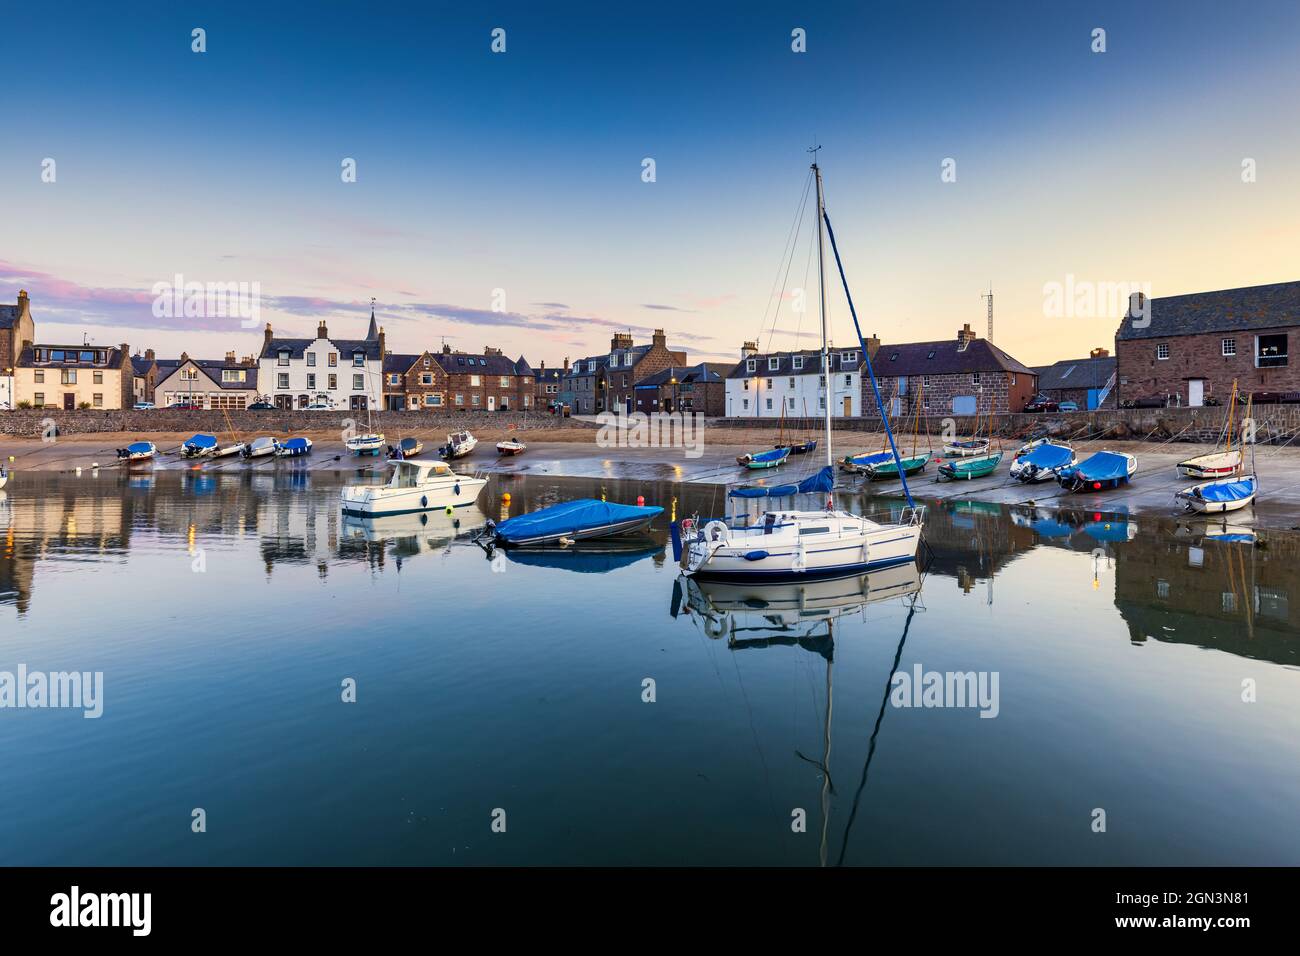 Sunrise at Stonehaven, a picturesque harbour town in Aberdeenshire lying to the south of Aberdeen on Scotland's north east coast. Stock Photo